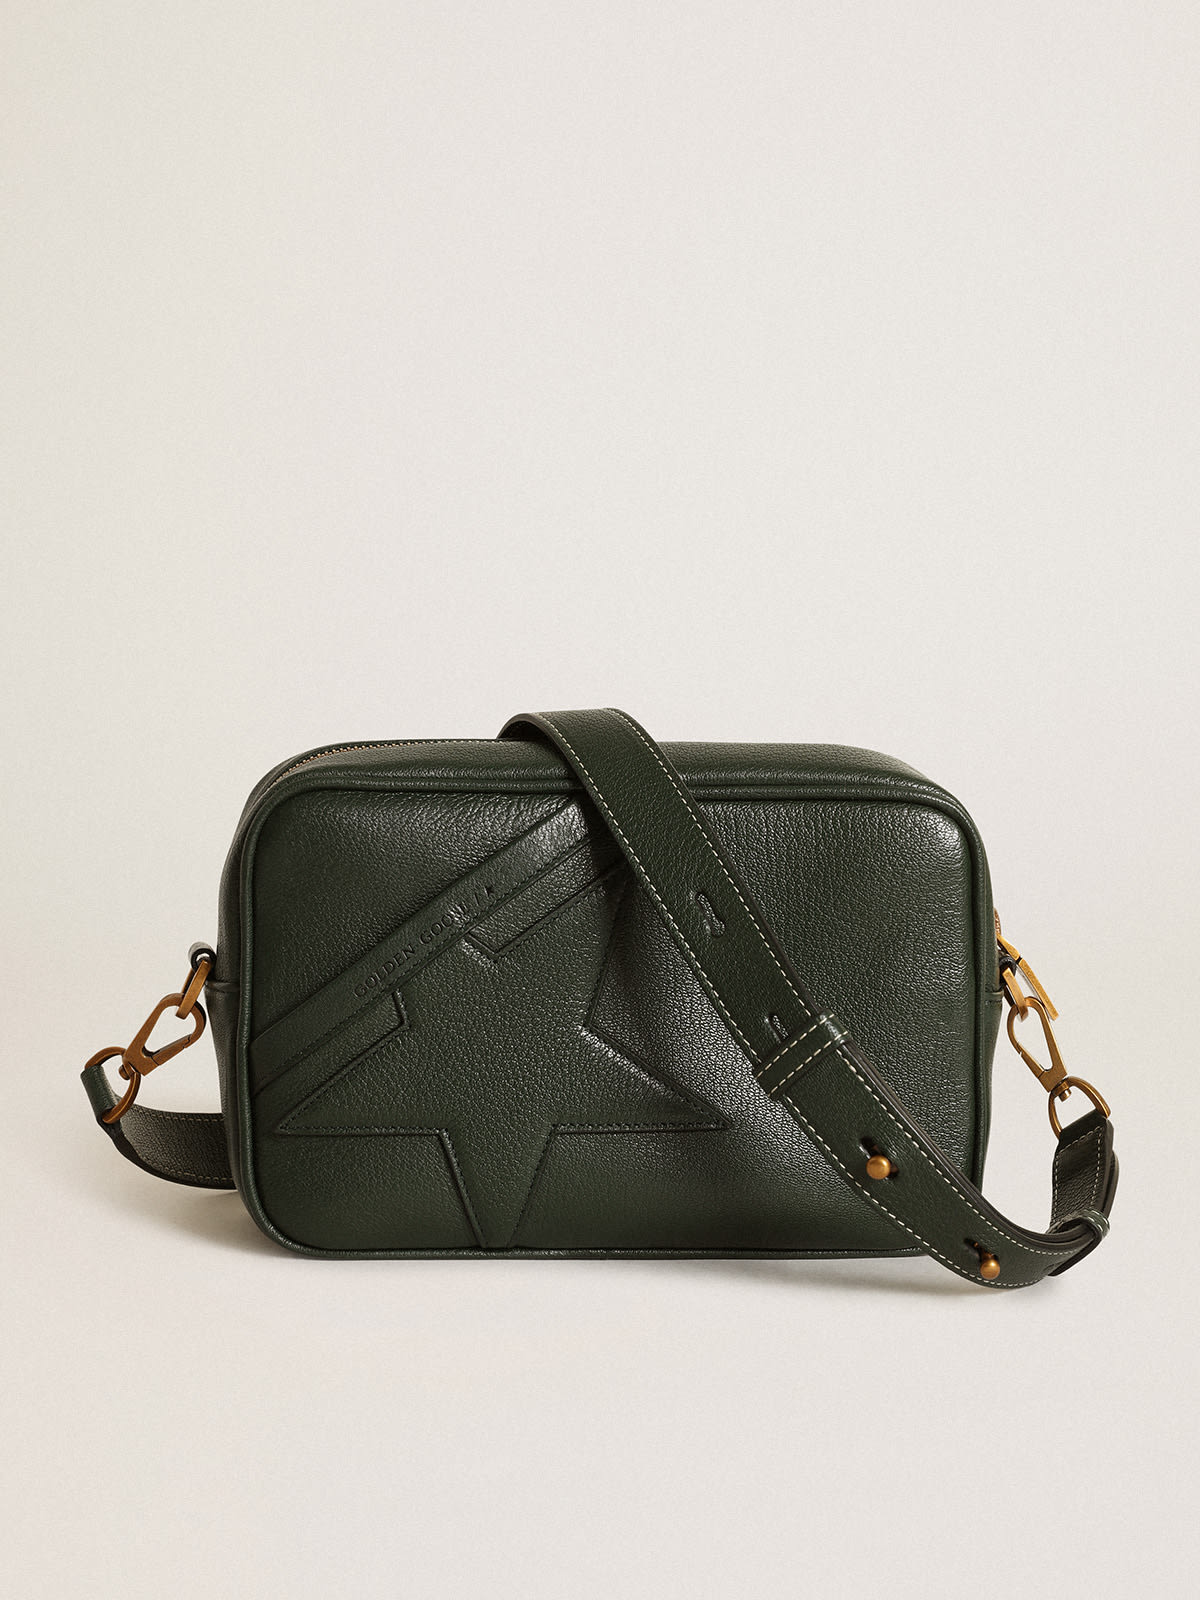 Golden Goose - Star Bag in dark green leather with tone-on-tone star in 